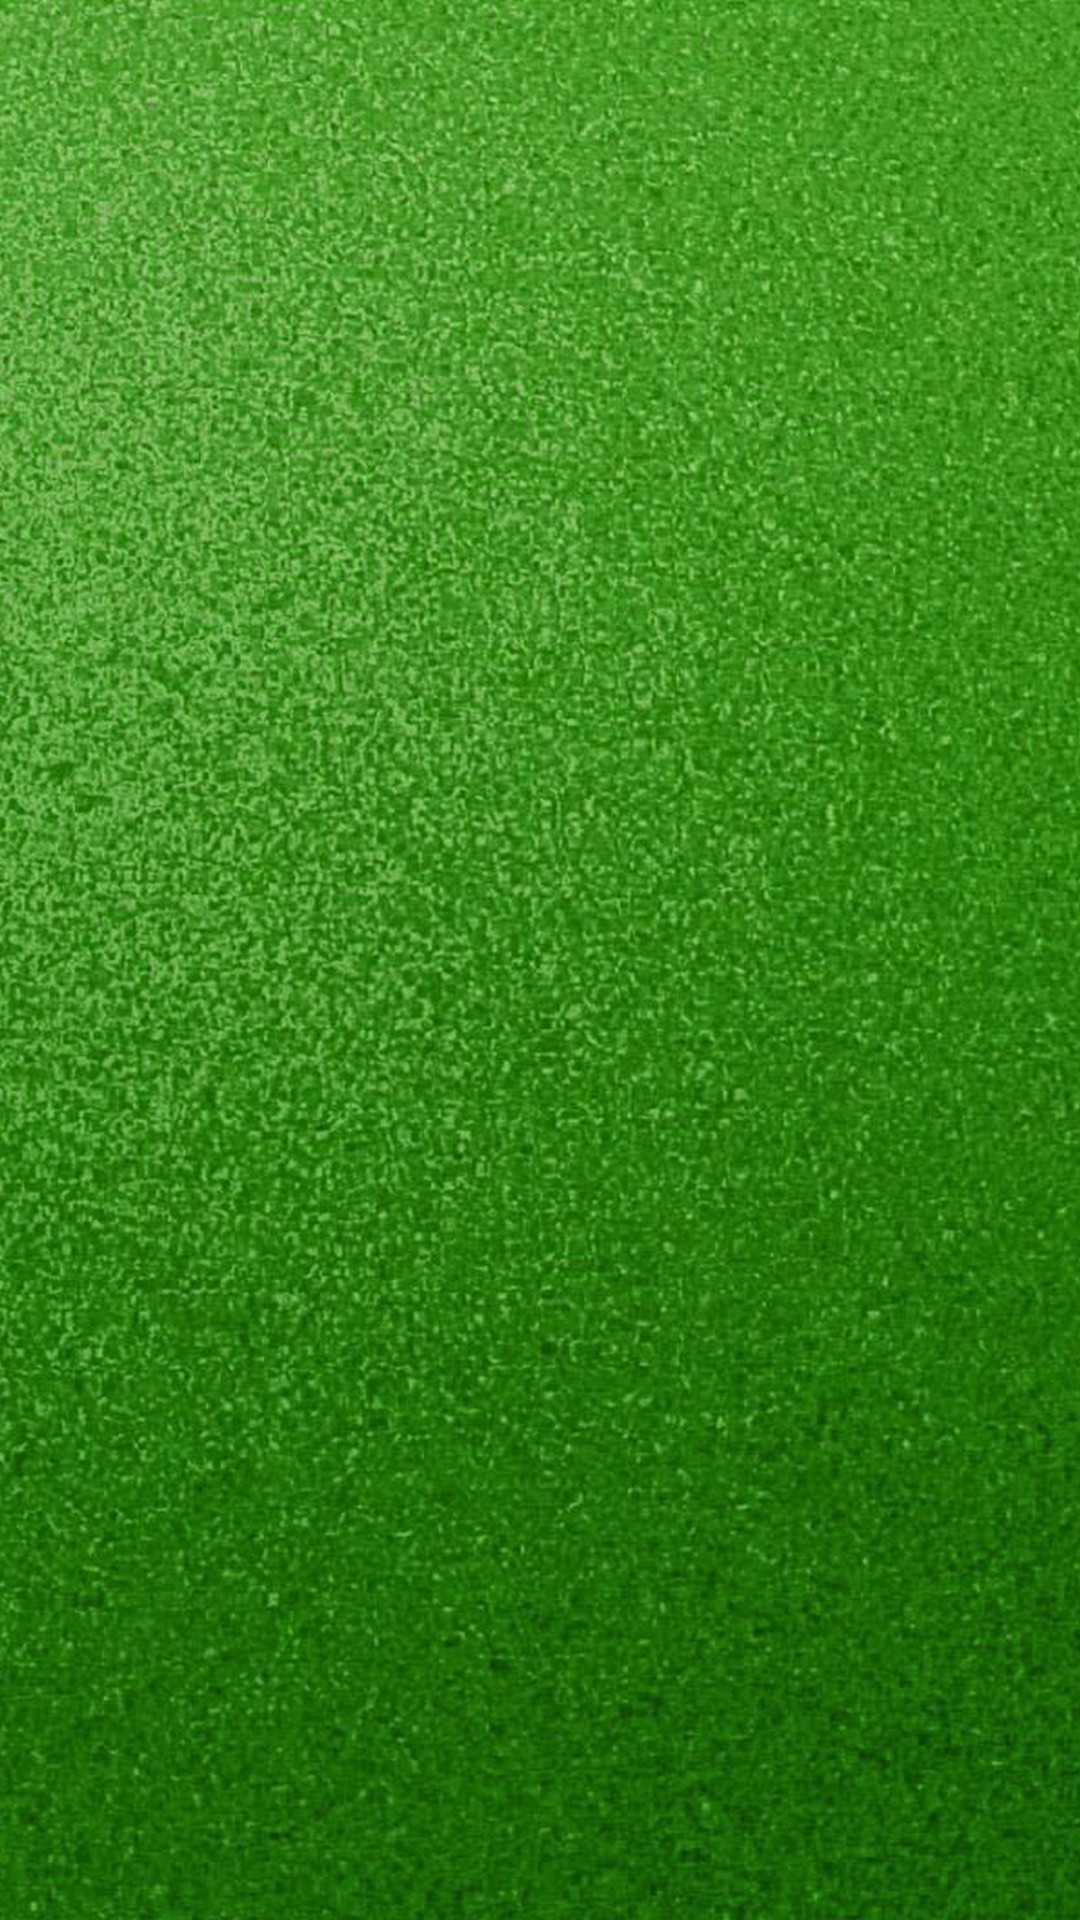 iPhone 8 Wallpaper Dark Green with resolution 1080X1920 pixel. You can make this wallpaper for your iPhone 5, 6, 7, 8, X backgrounds, Mobile Screensaver, or iPad Lock Screen